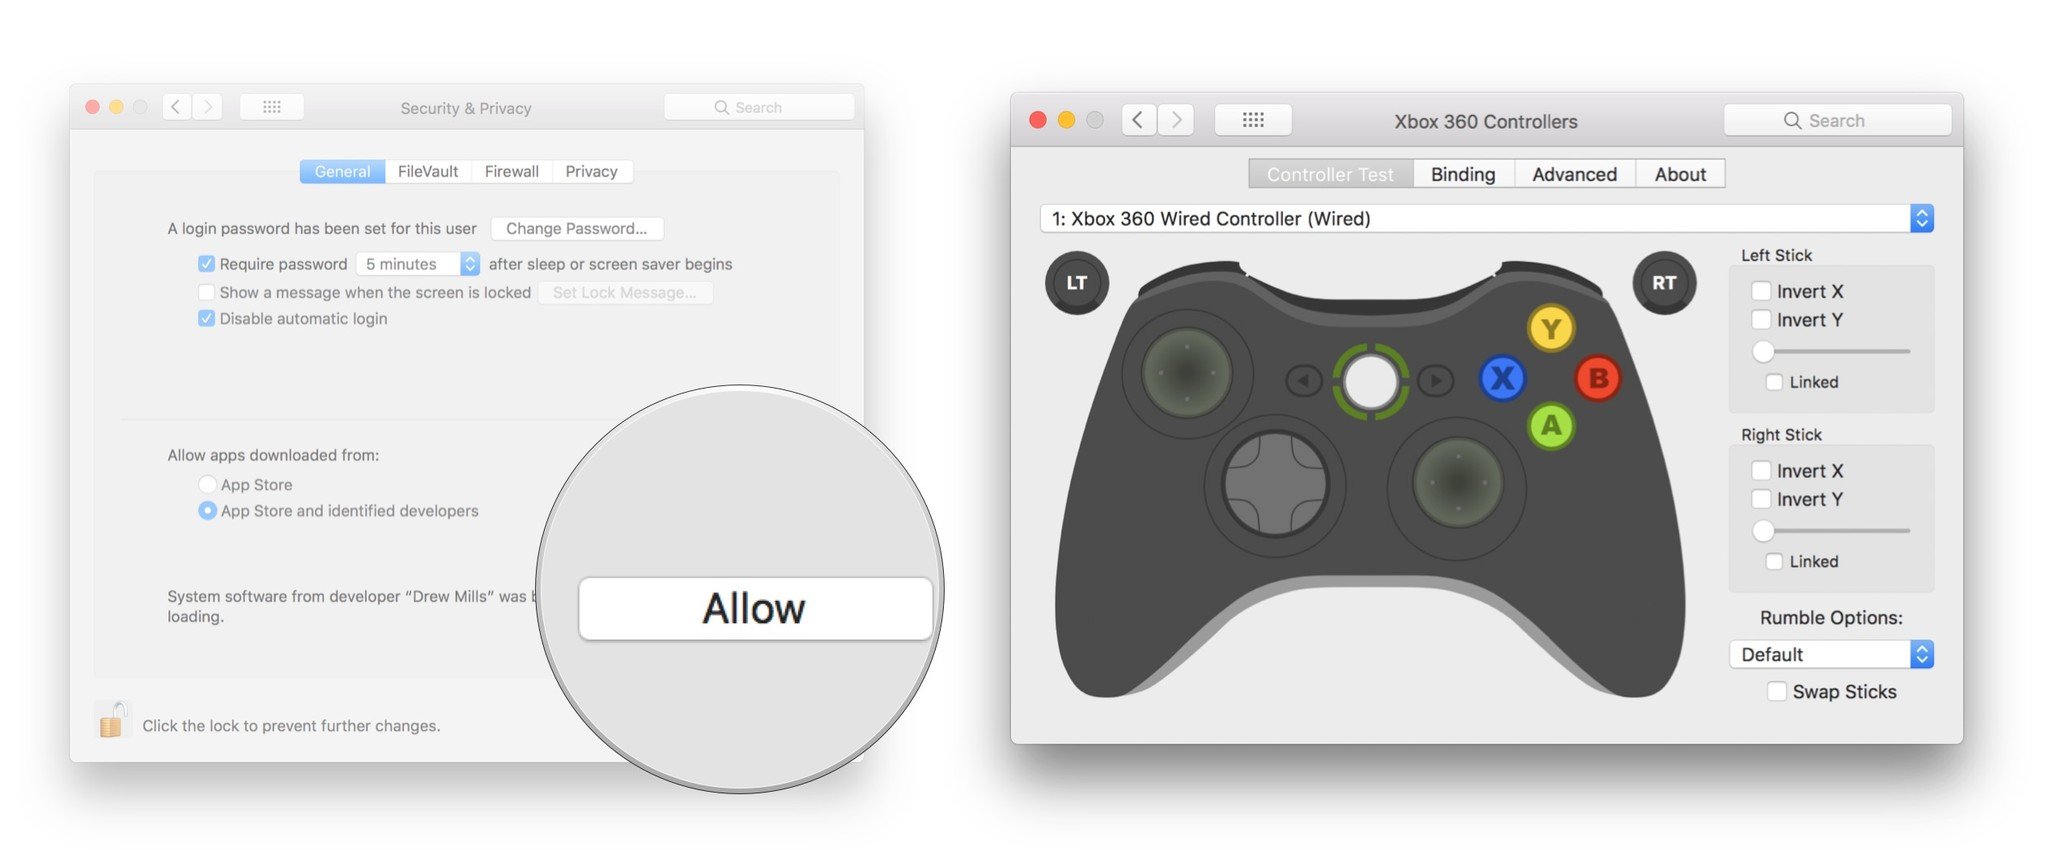 How to use the Xbox 360 controller on Mac